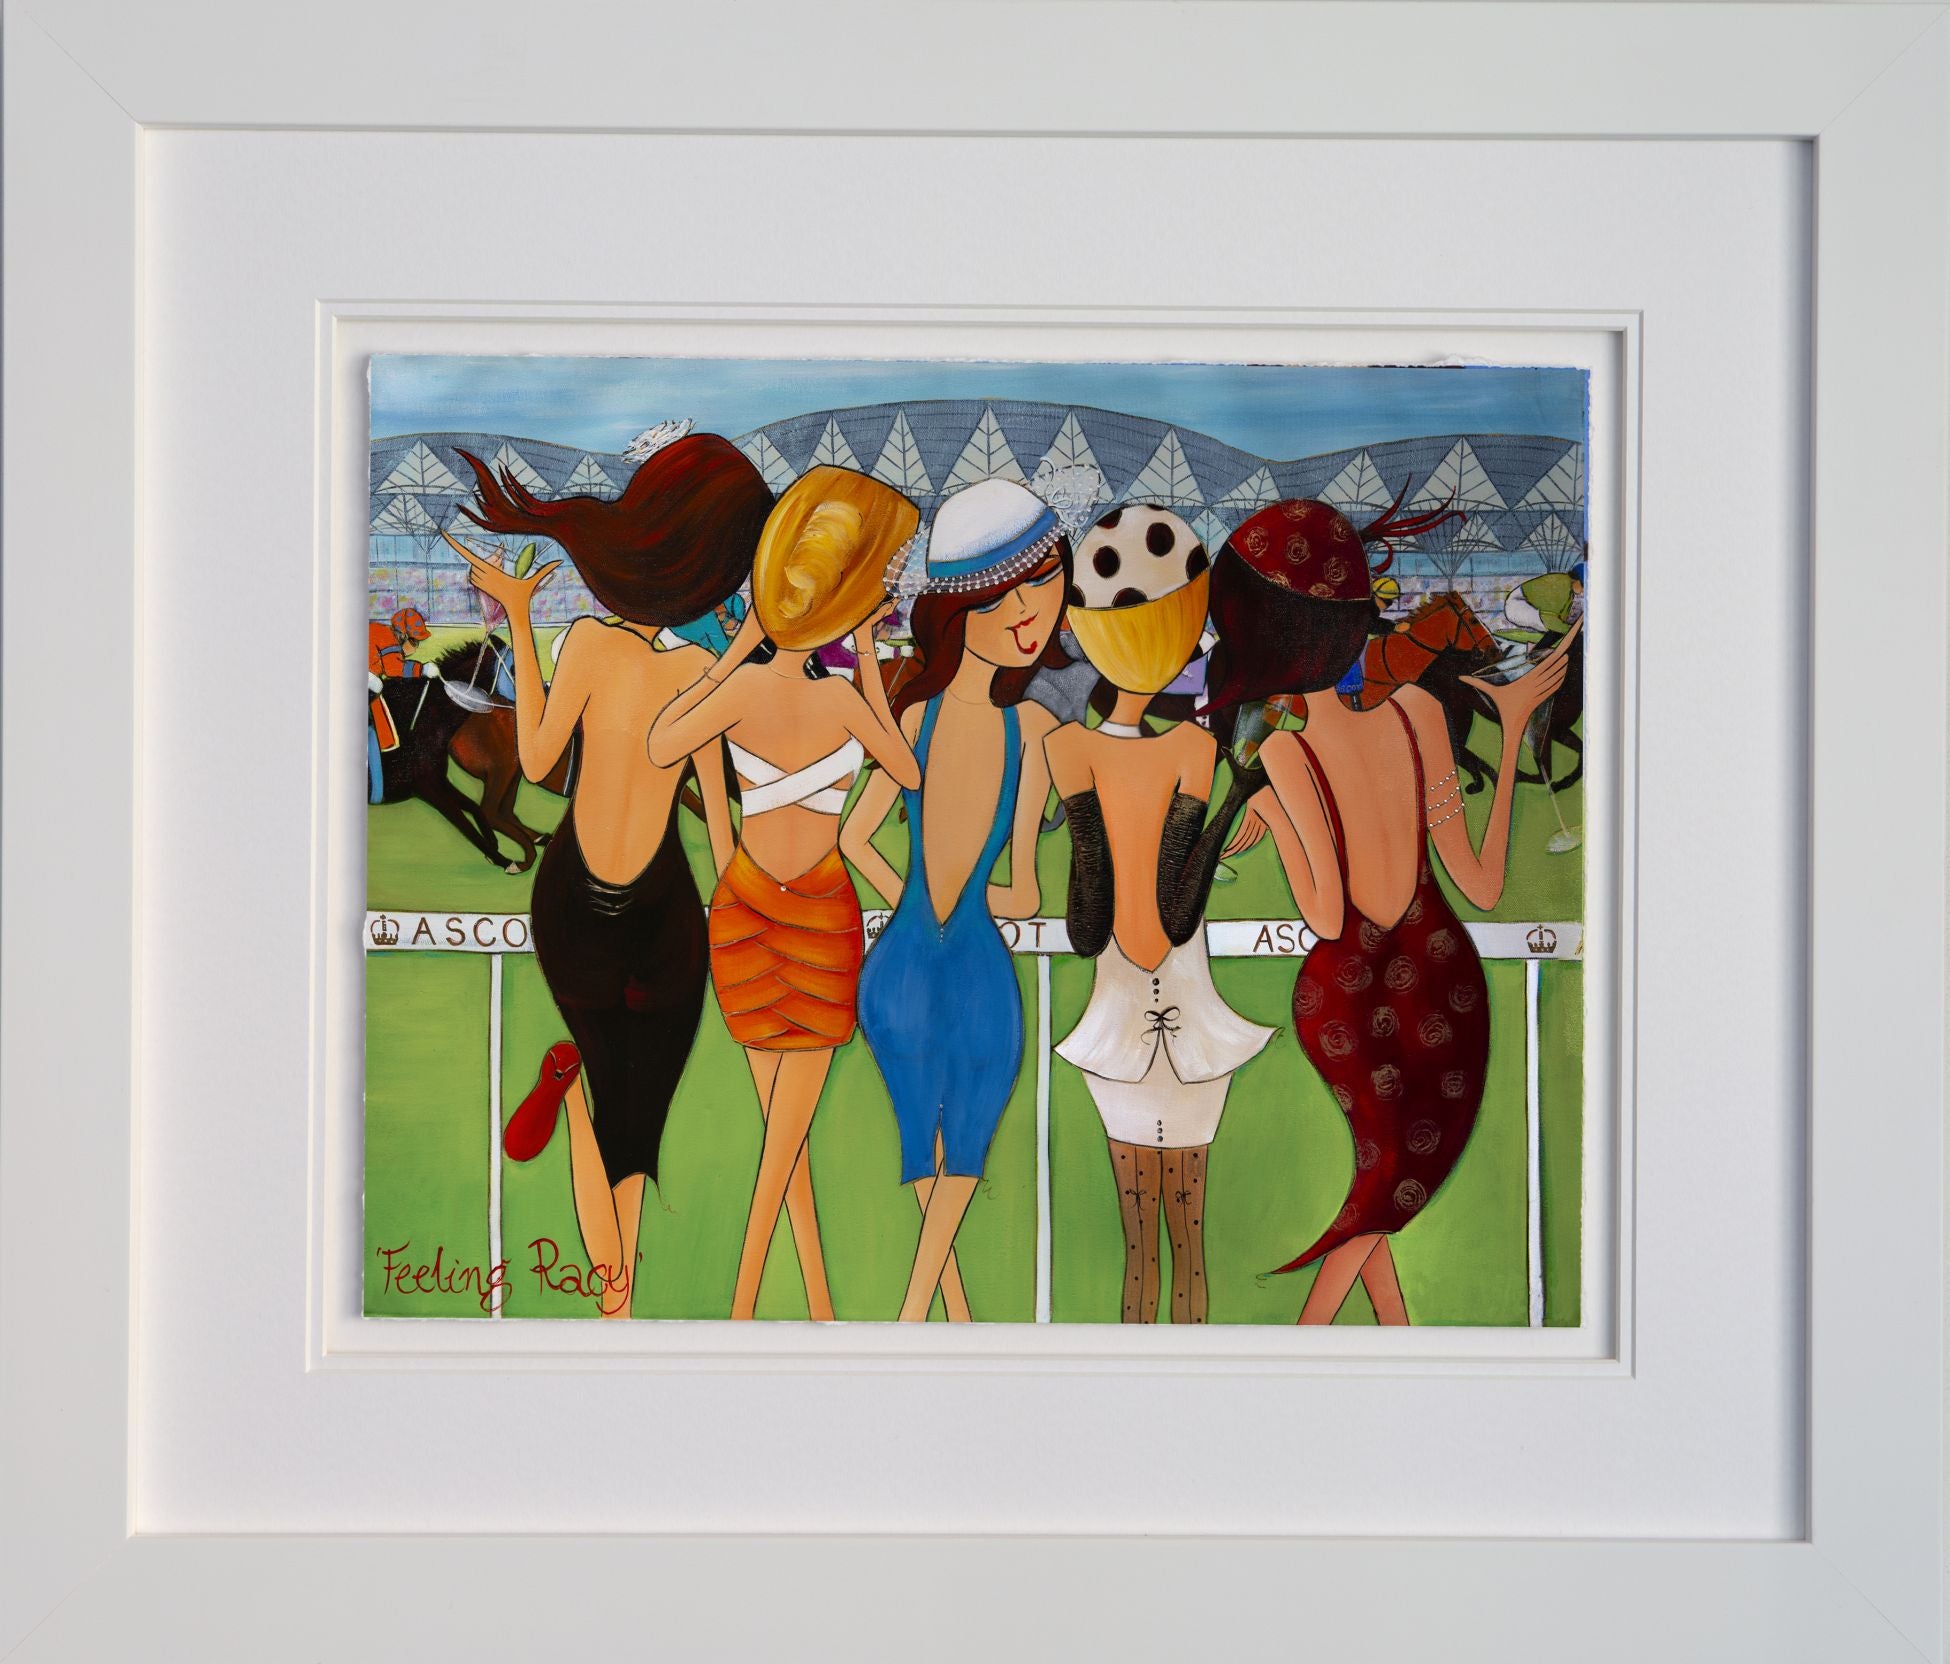 Natalie Dyer - 'Feeling Racy' - Limited Edition Print